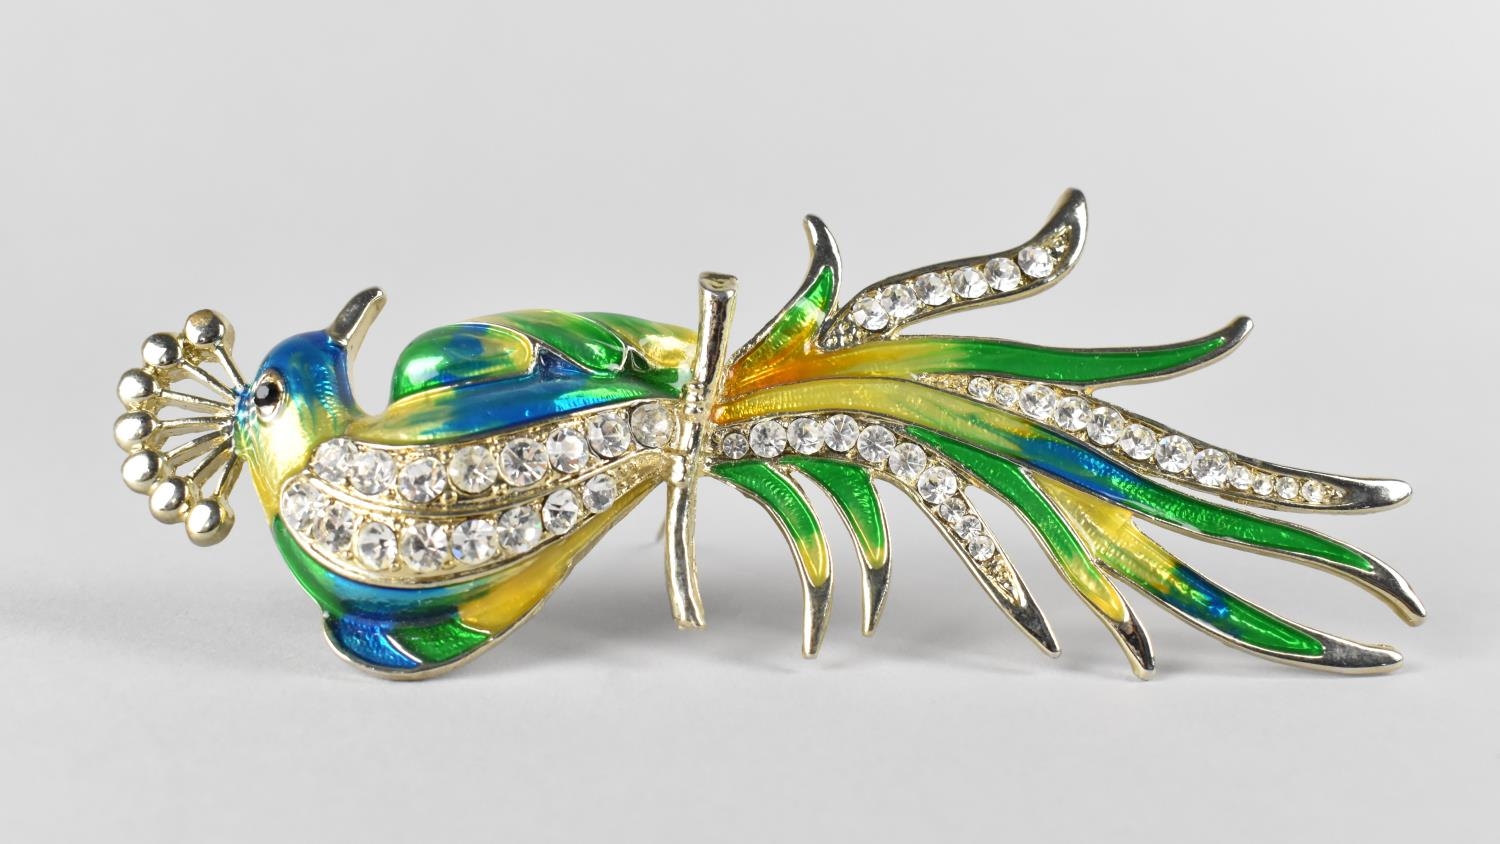 A Large Enamel and Metal Jewelled Brooch in the Form of a Peacock, 14cm high